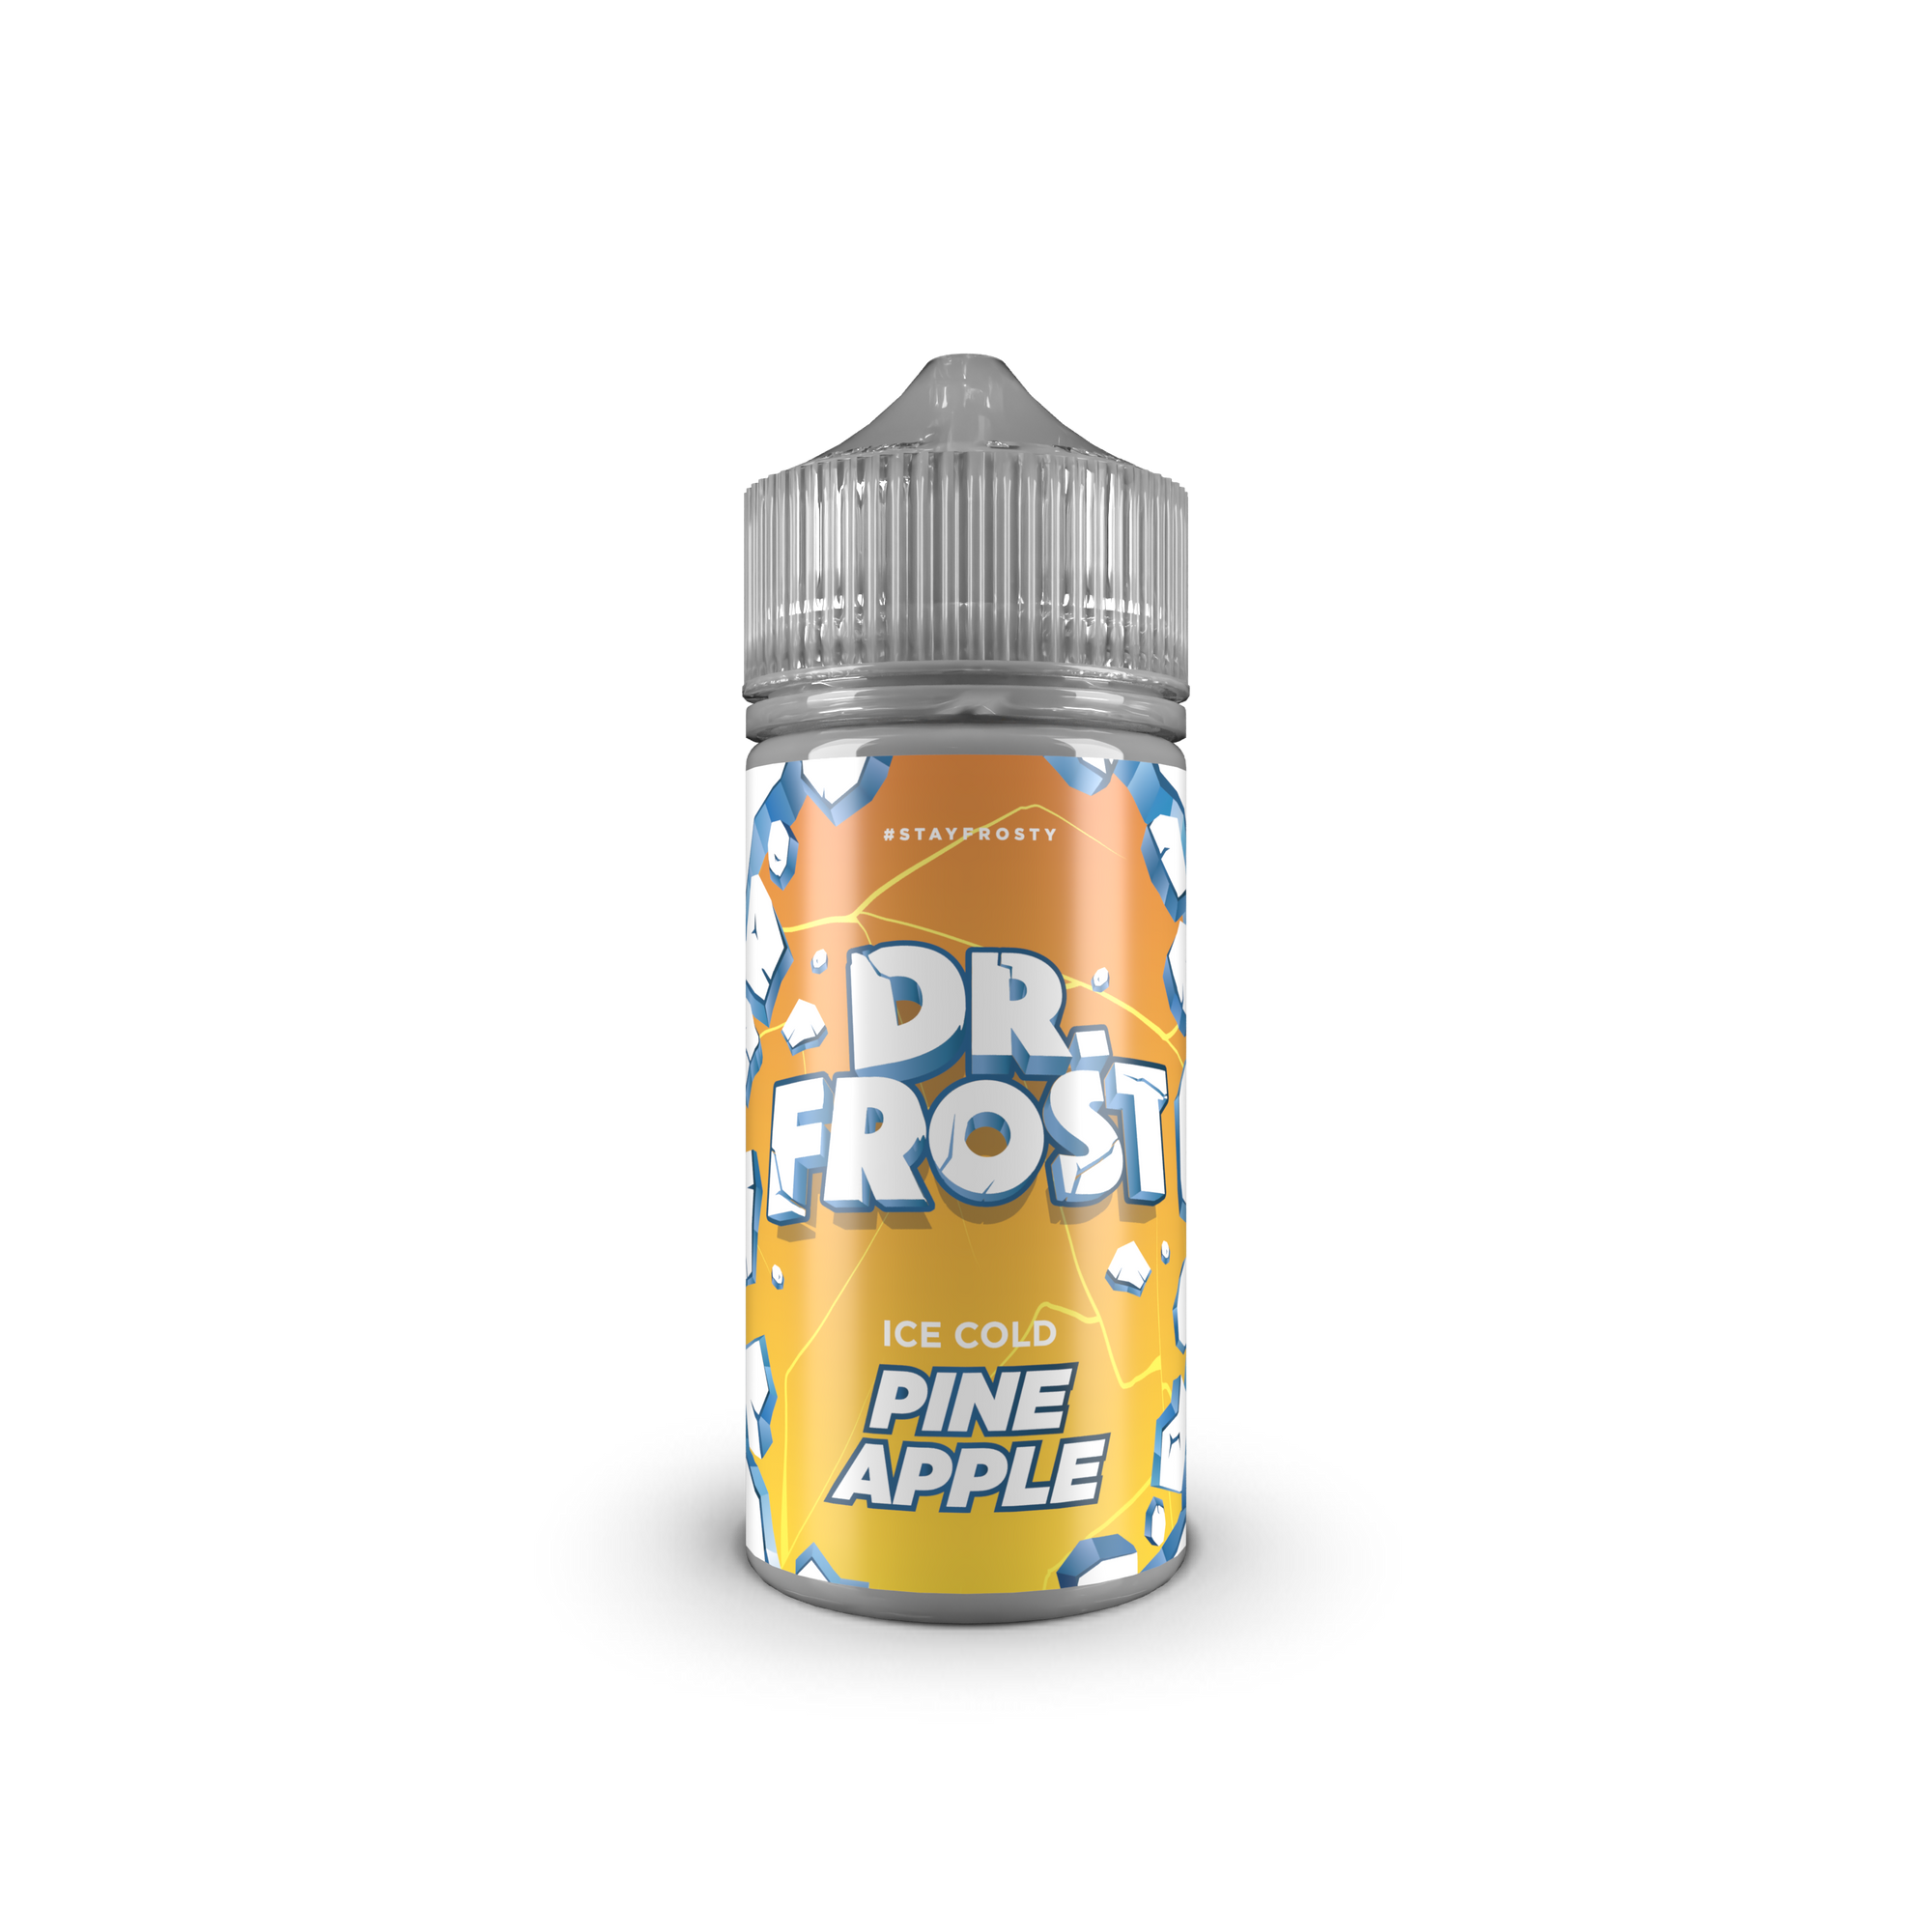 Buy Pineapple Ice Dr Frost - Wick and Wire Co Melbourne Vape Shop, Victoria Australia